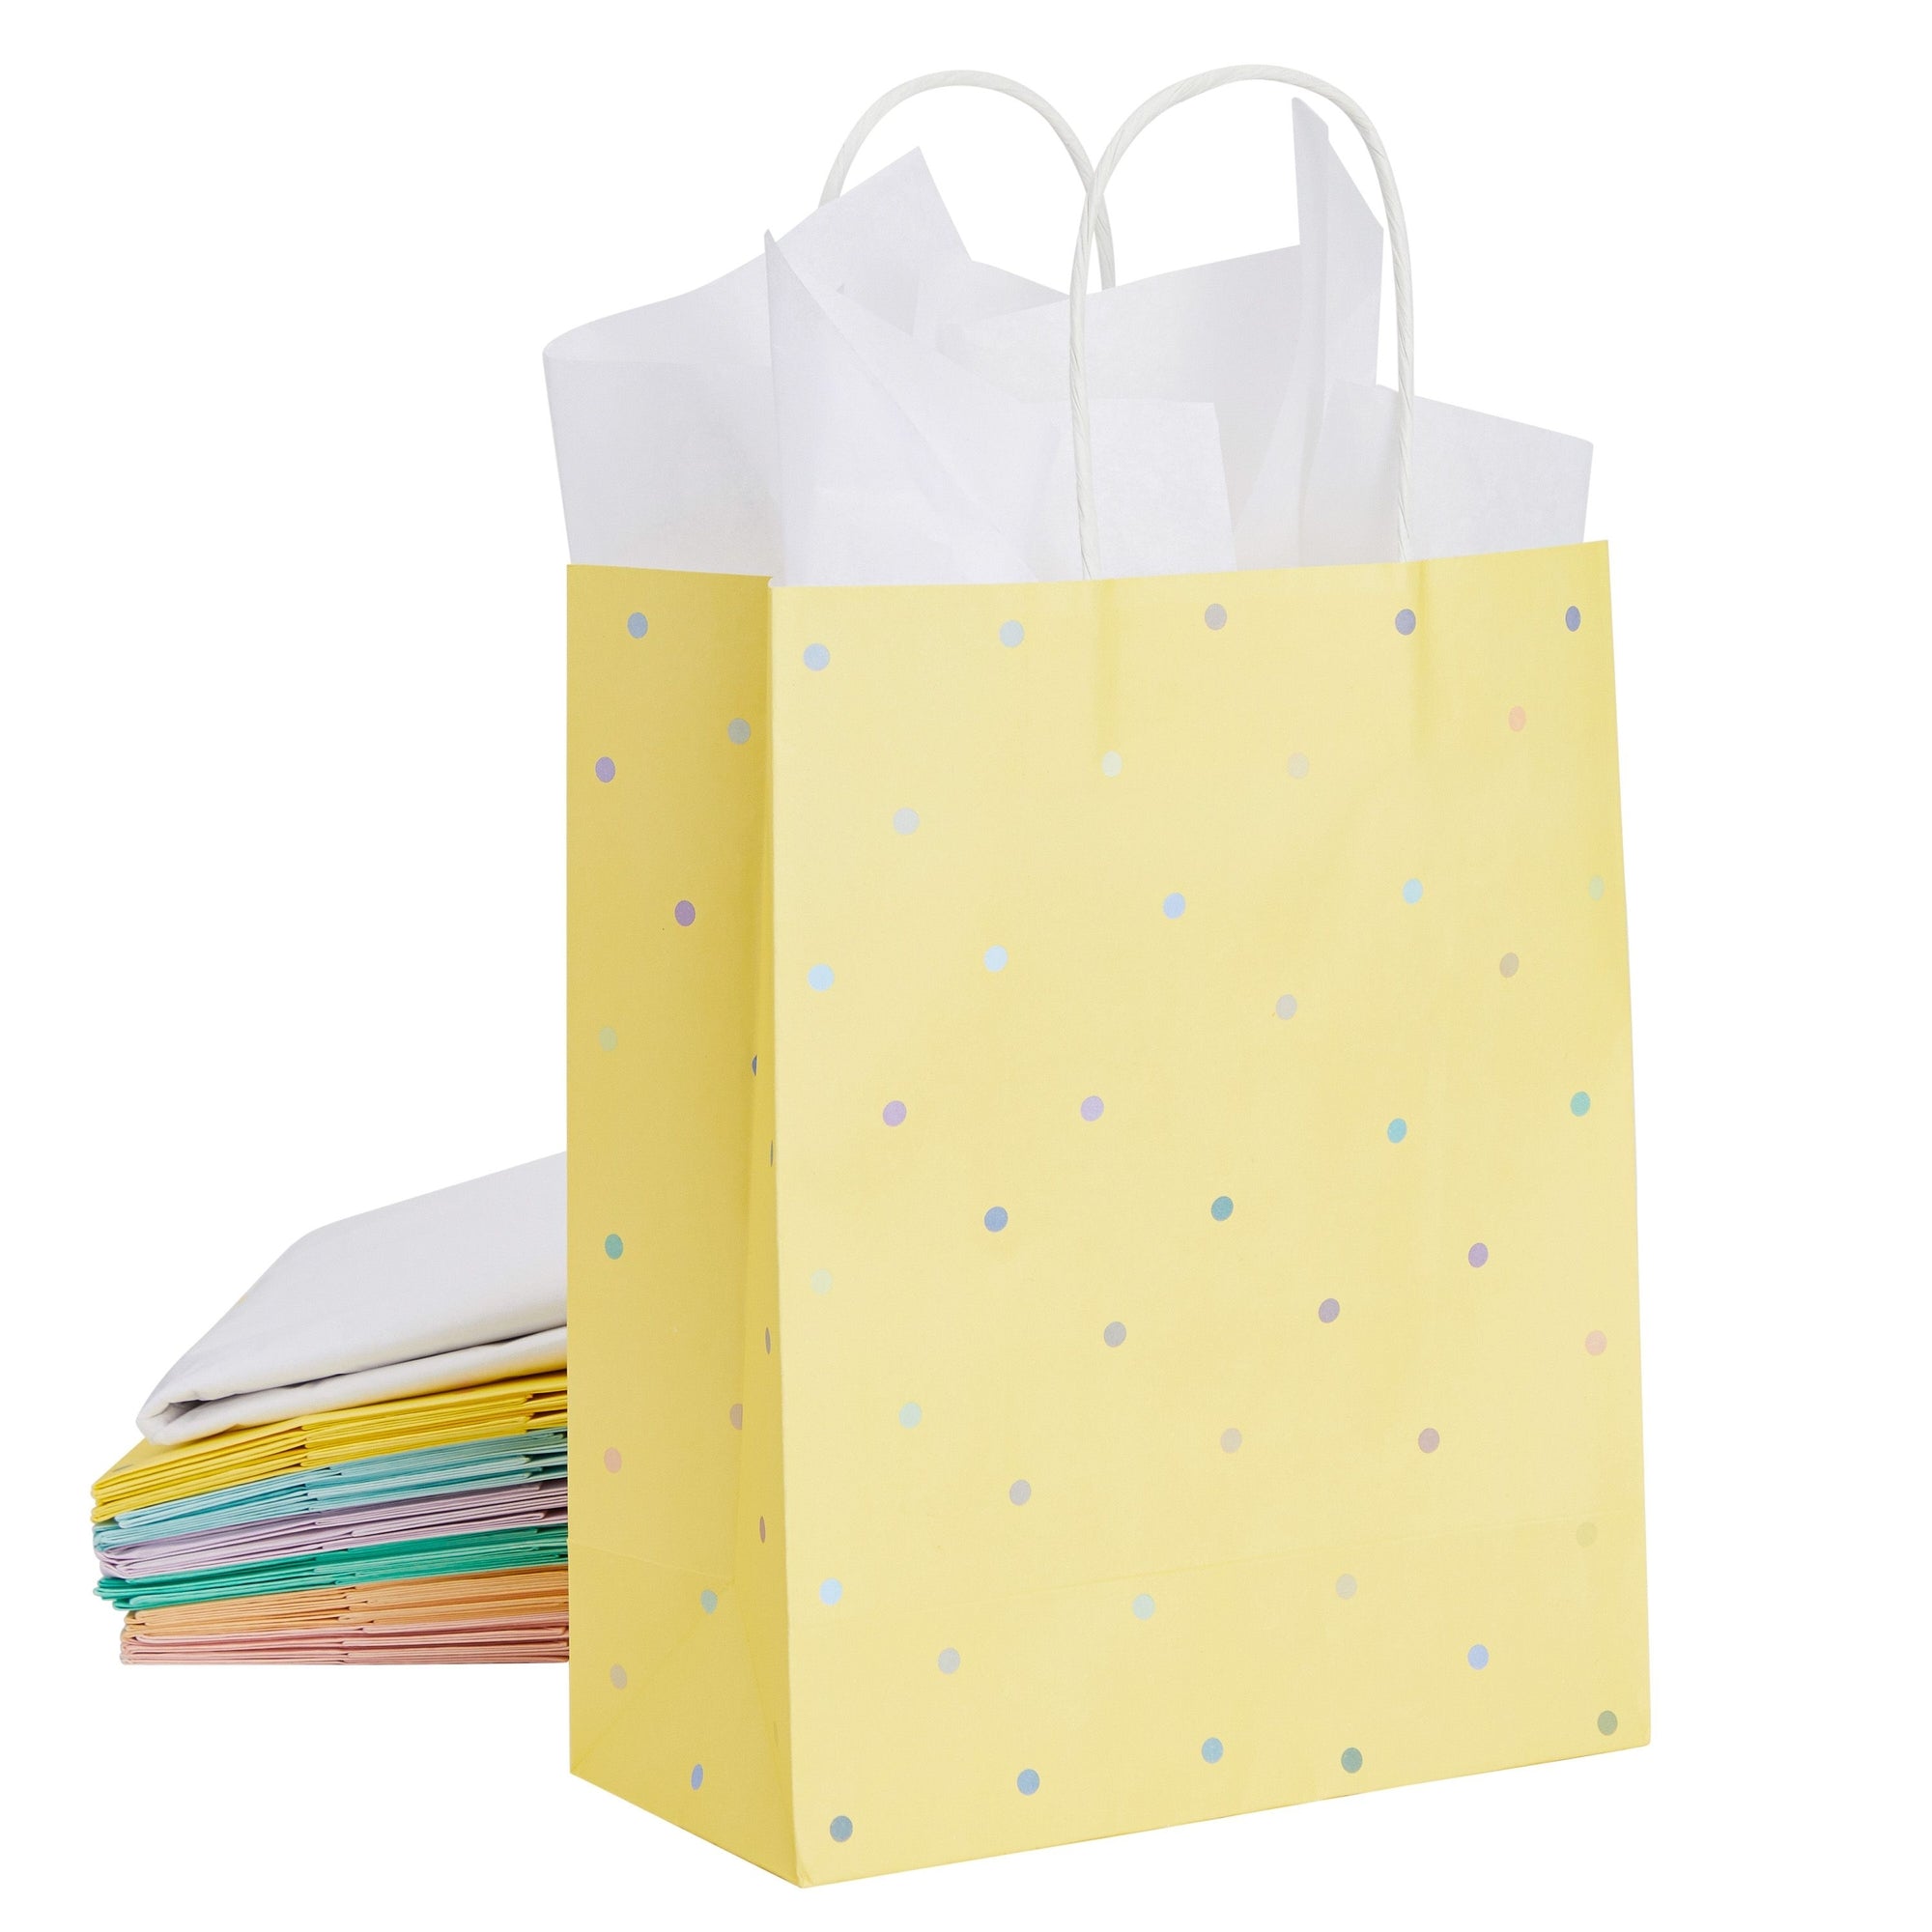 Rainbow Gift Bags with Handles and White Tissue Paper (15 Pack)